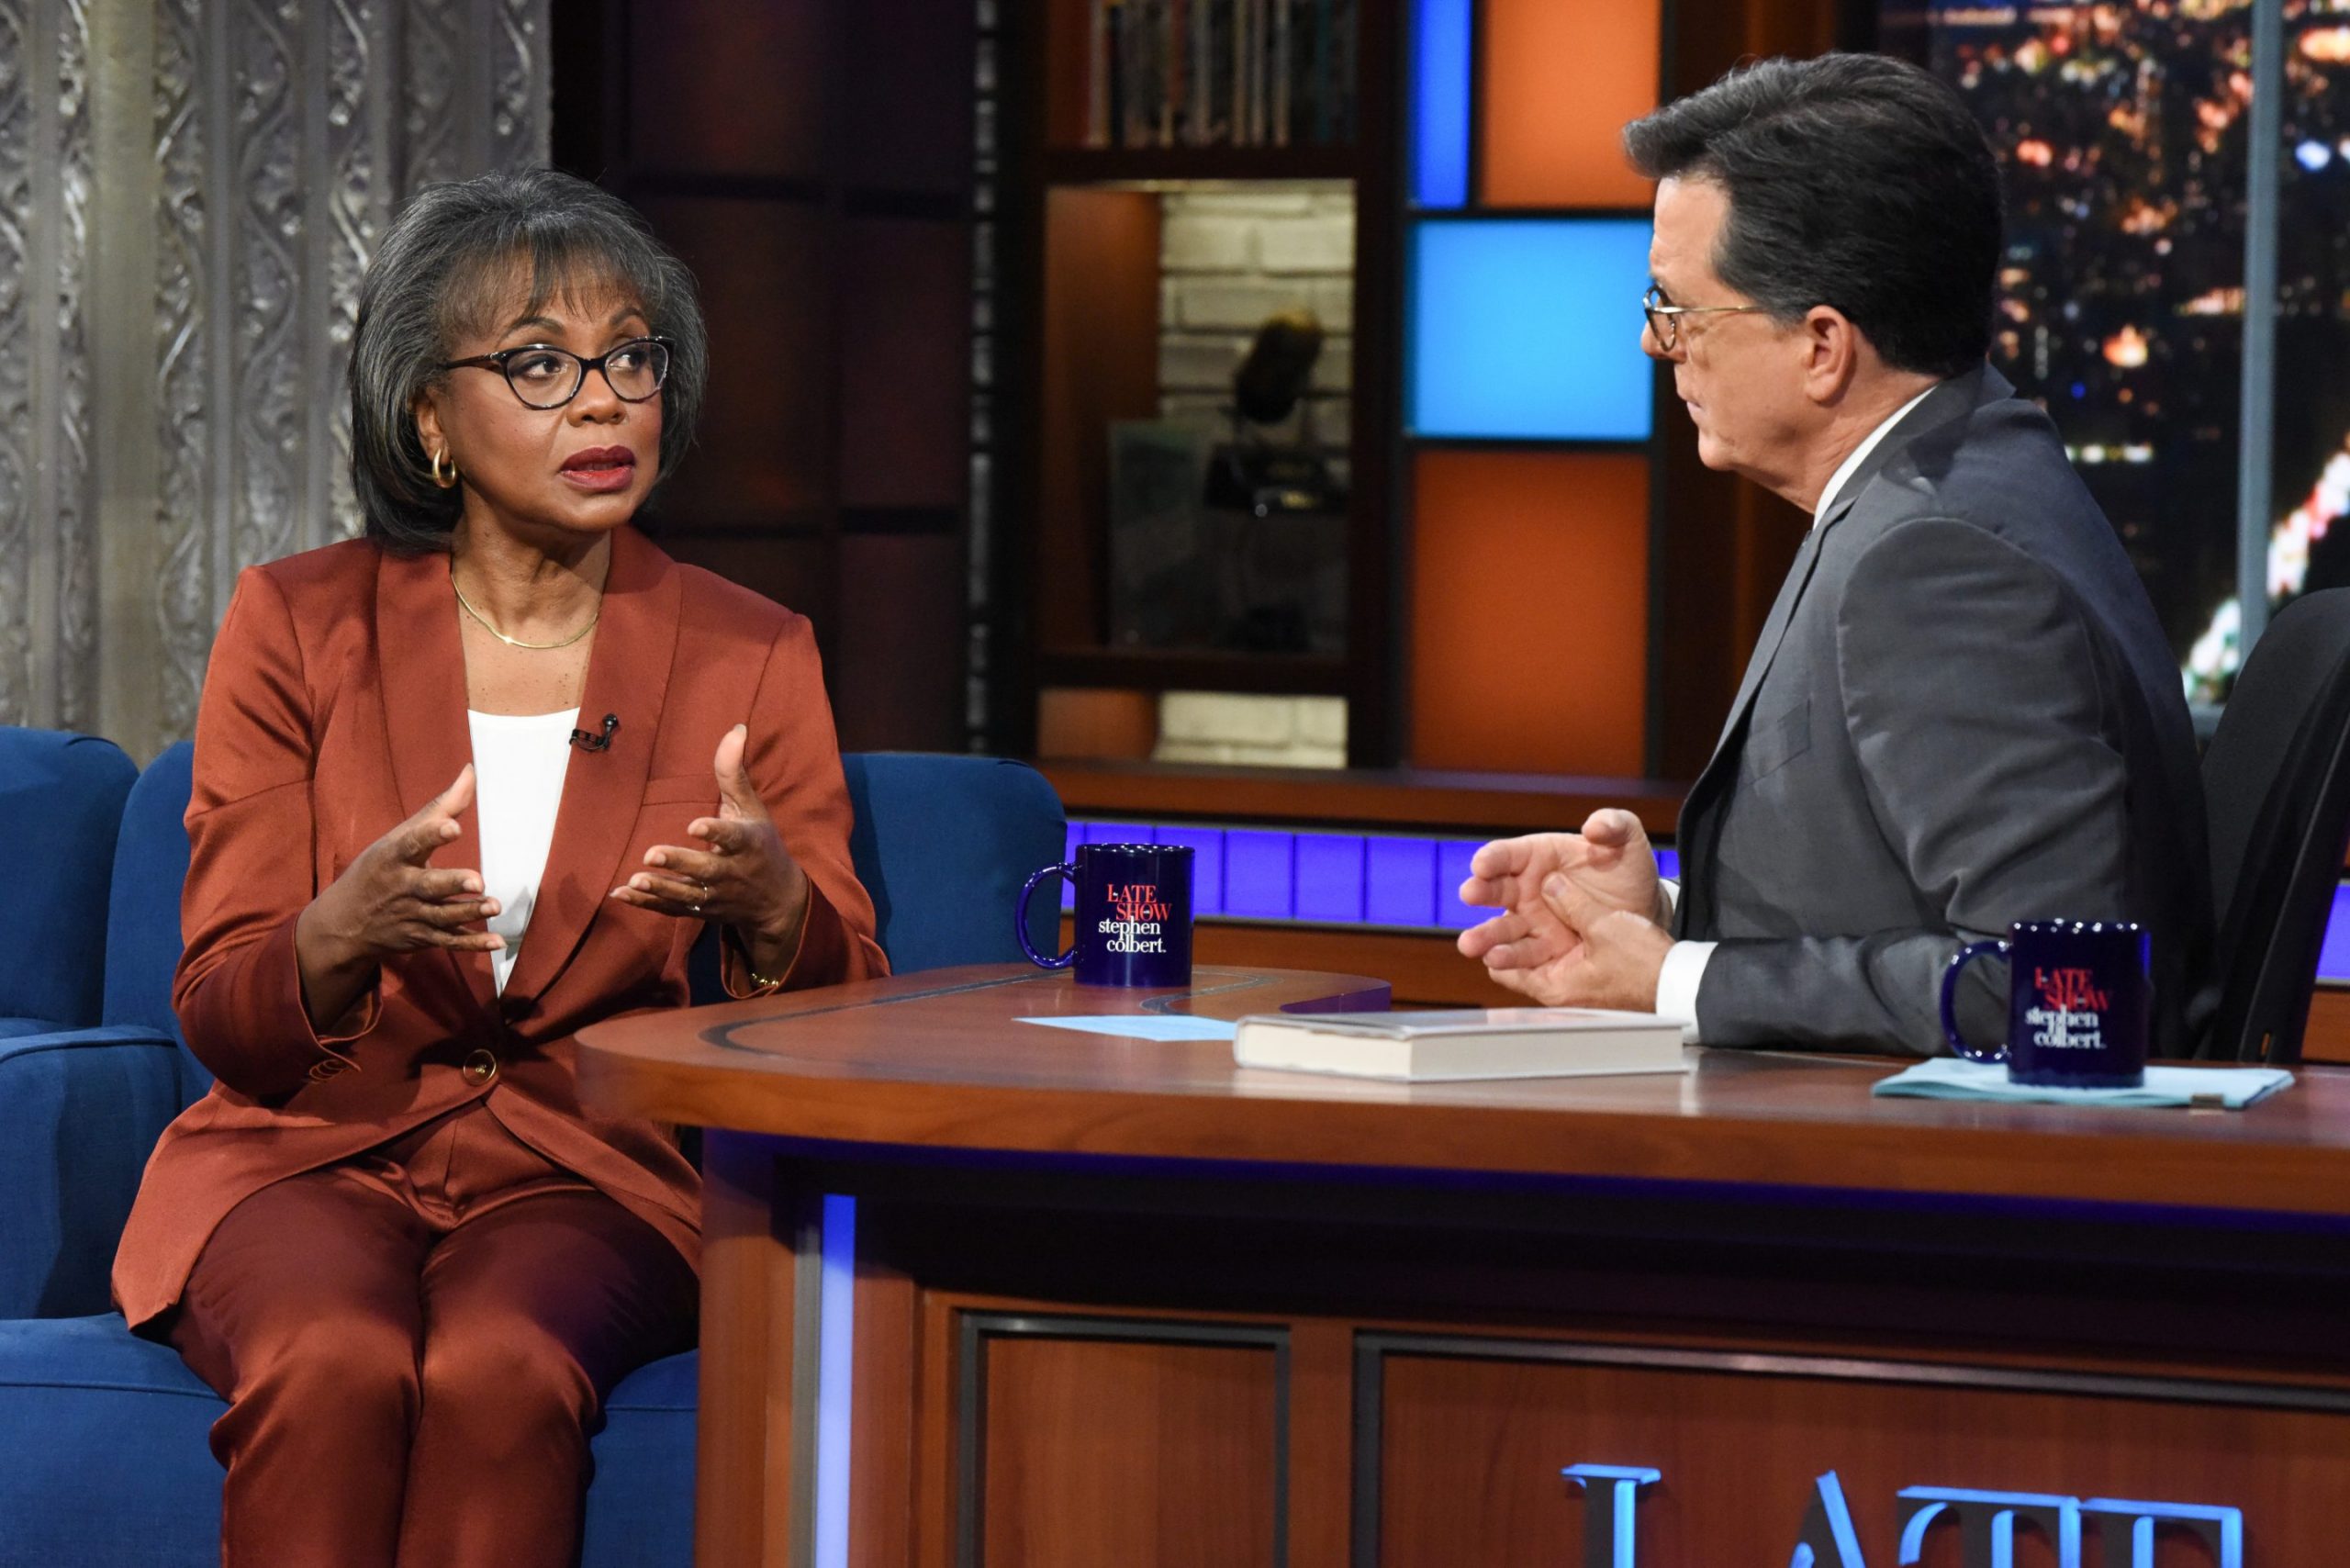 Anita Hill: Bystanders can fight workplace sexual harassment